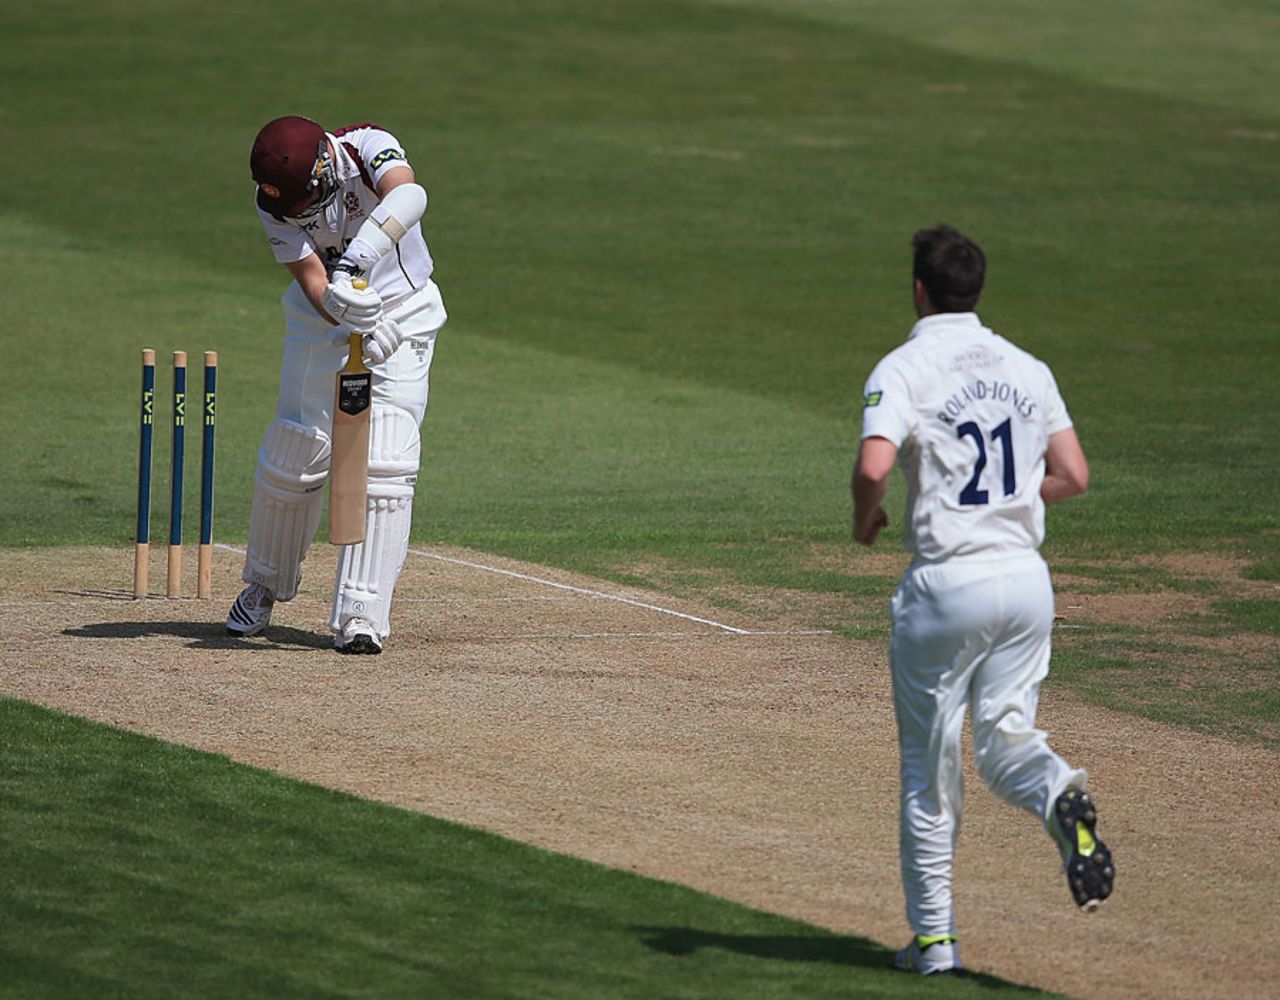 James Middlebrook was bowled by Toby Roland-Jones, Northamptonshire v Middlesex, County Championship, Division One, Wantage Road, May 18, 2014